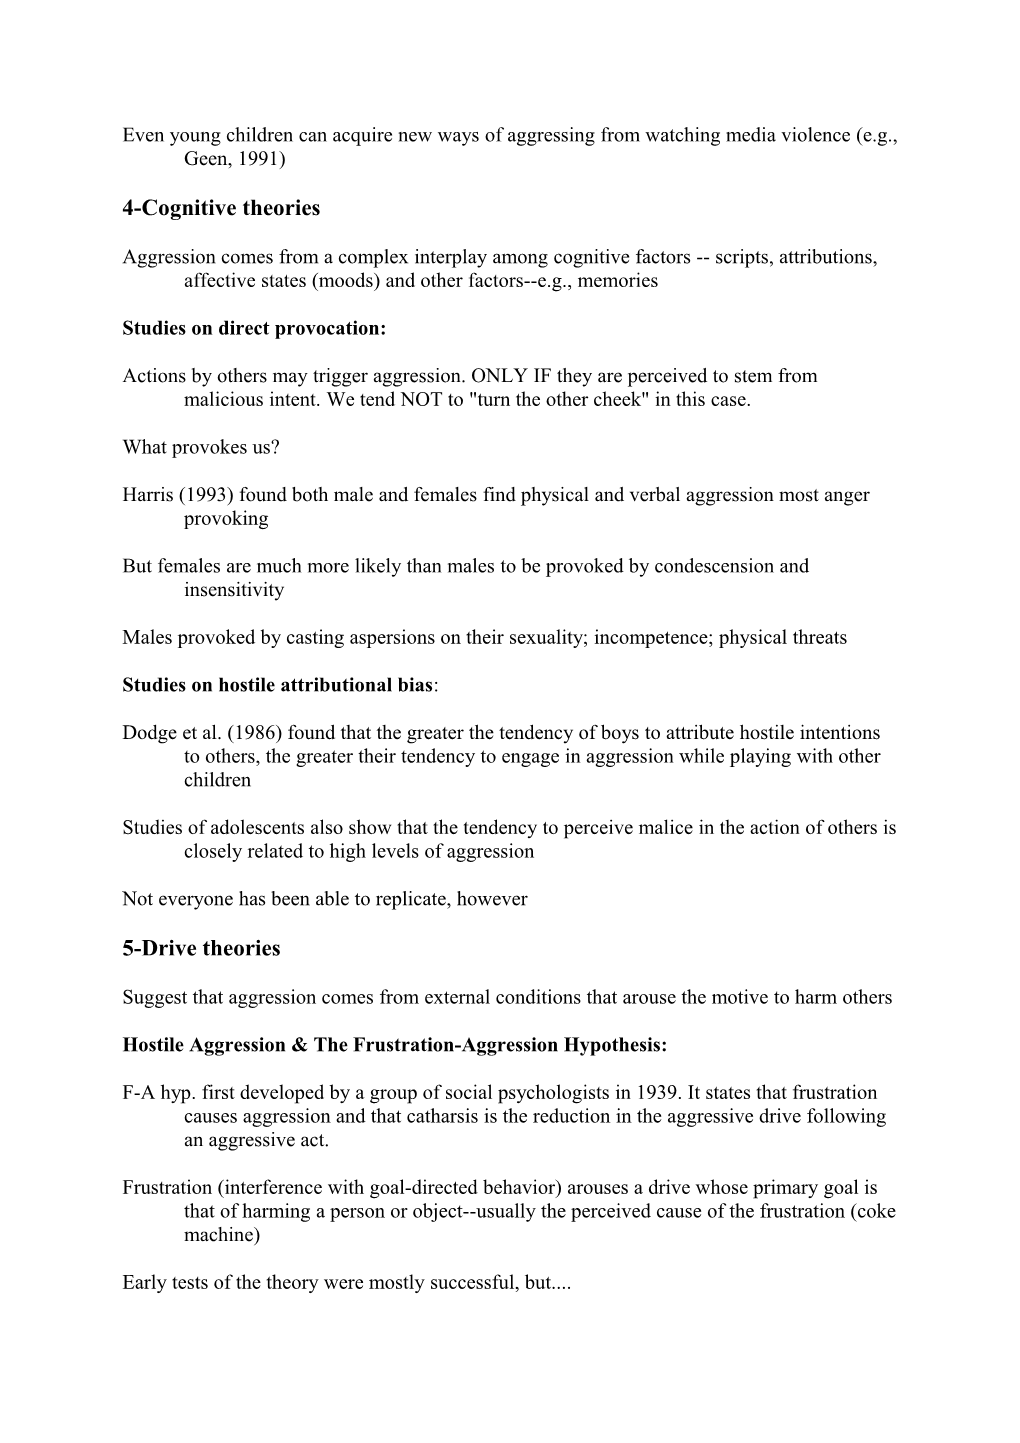 What Is Aggression? (Handout/Exercise)